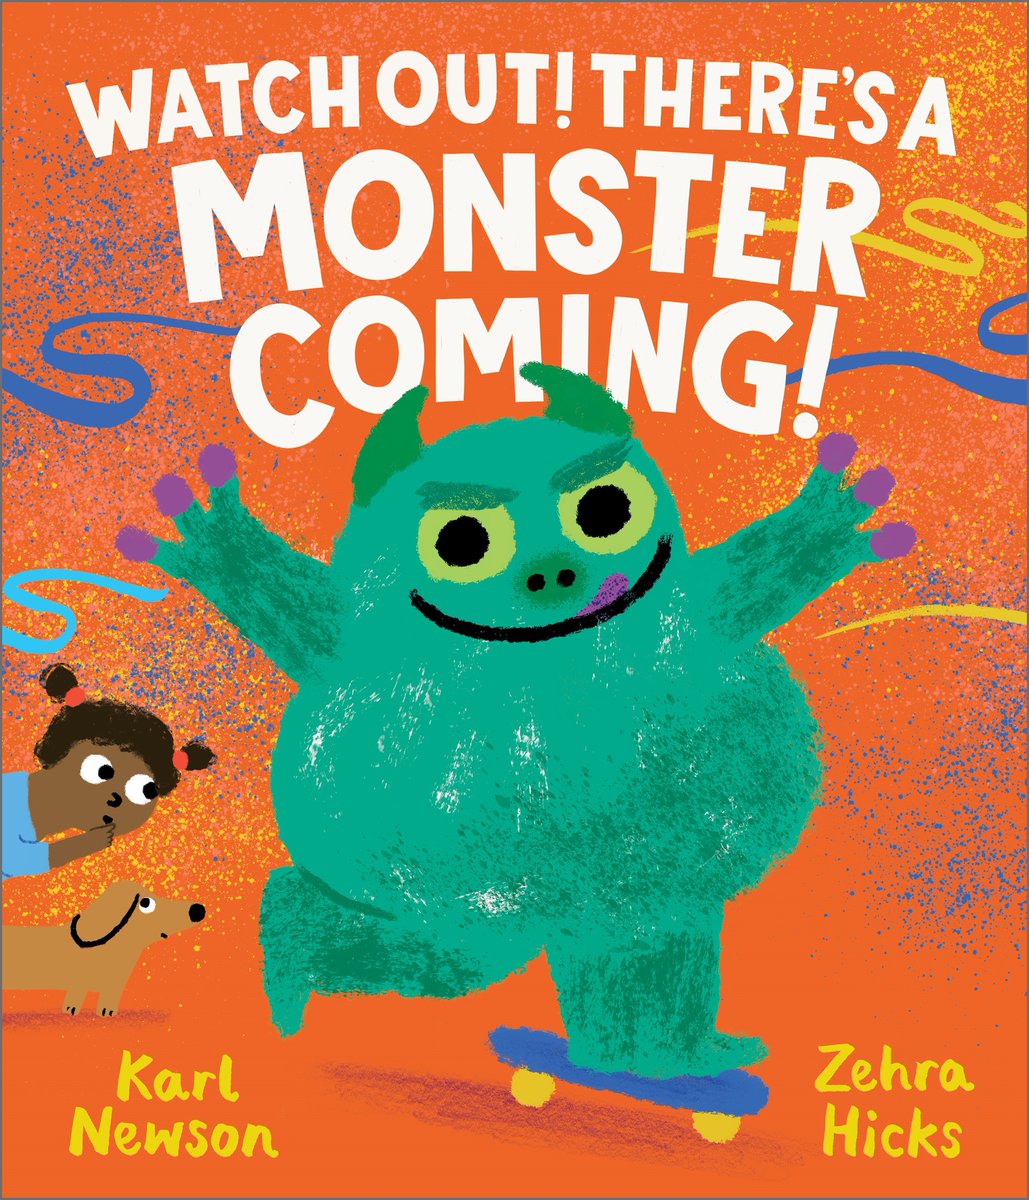 'Bright and bold, this brilliantly boisterous rhyming picture book is a read-aloud triumph' @lovereadingkids WATCH OUT! THERE'S A MONSTER COMING! by @Karlwheel & @zehrahicks is out today in paperback! 🍰